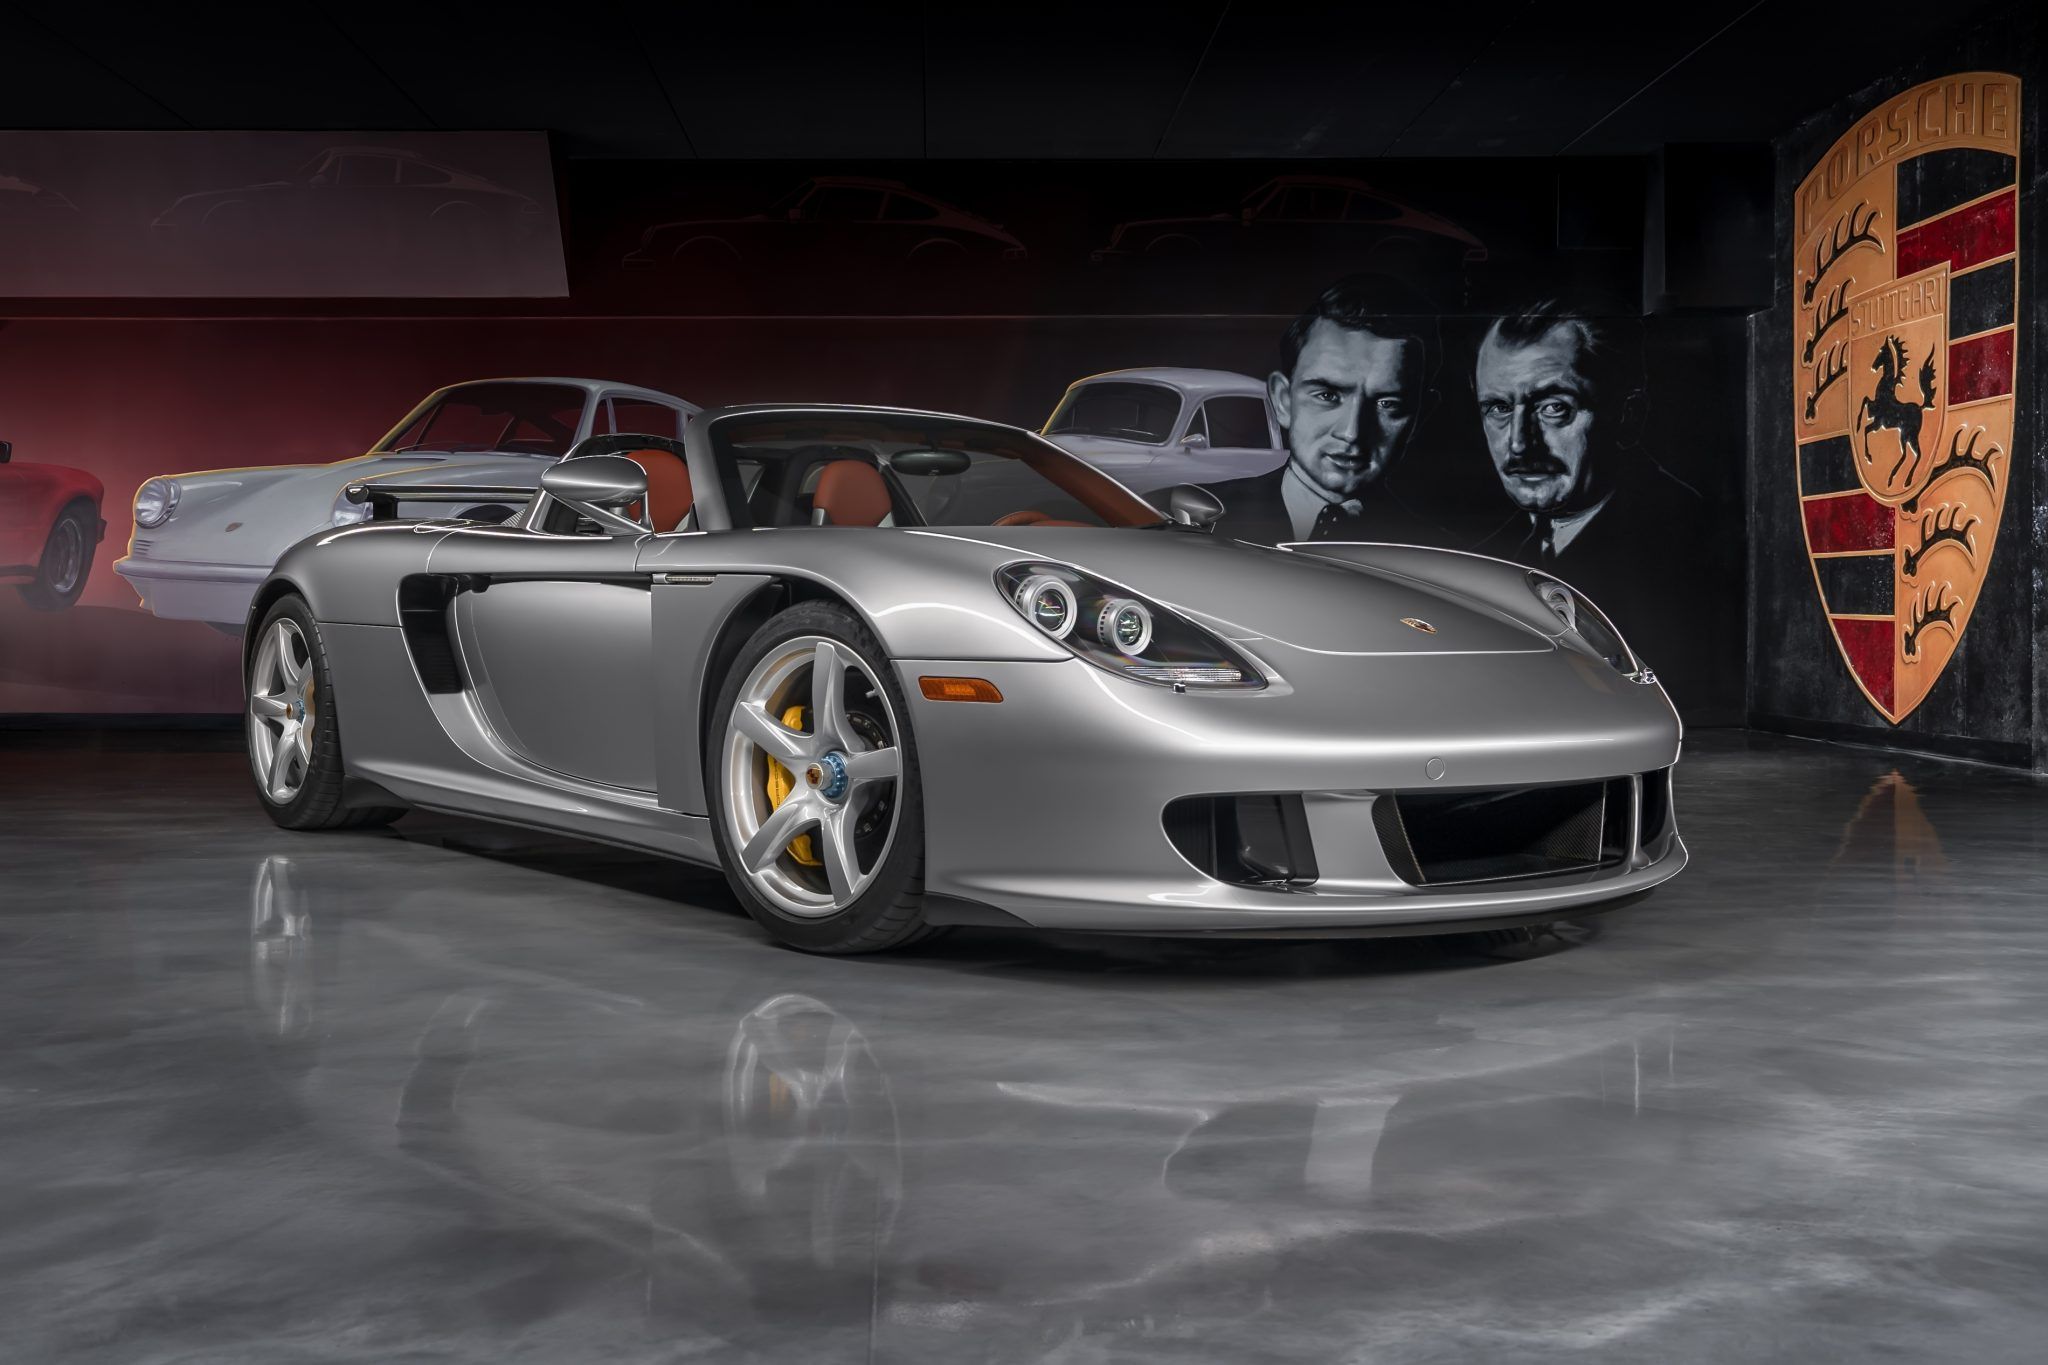 spons veiling Malawi 250-Mile Porsche Carrera GT Sells for a Record-Breaking $2M